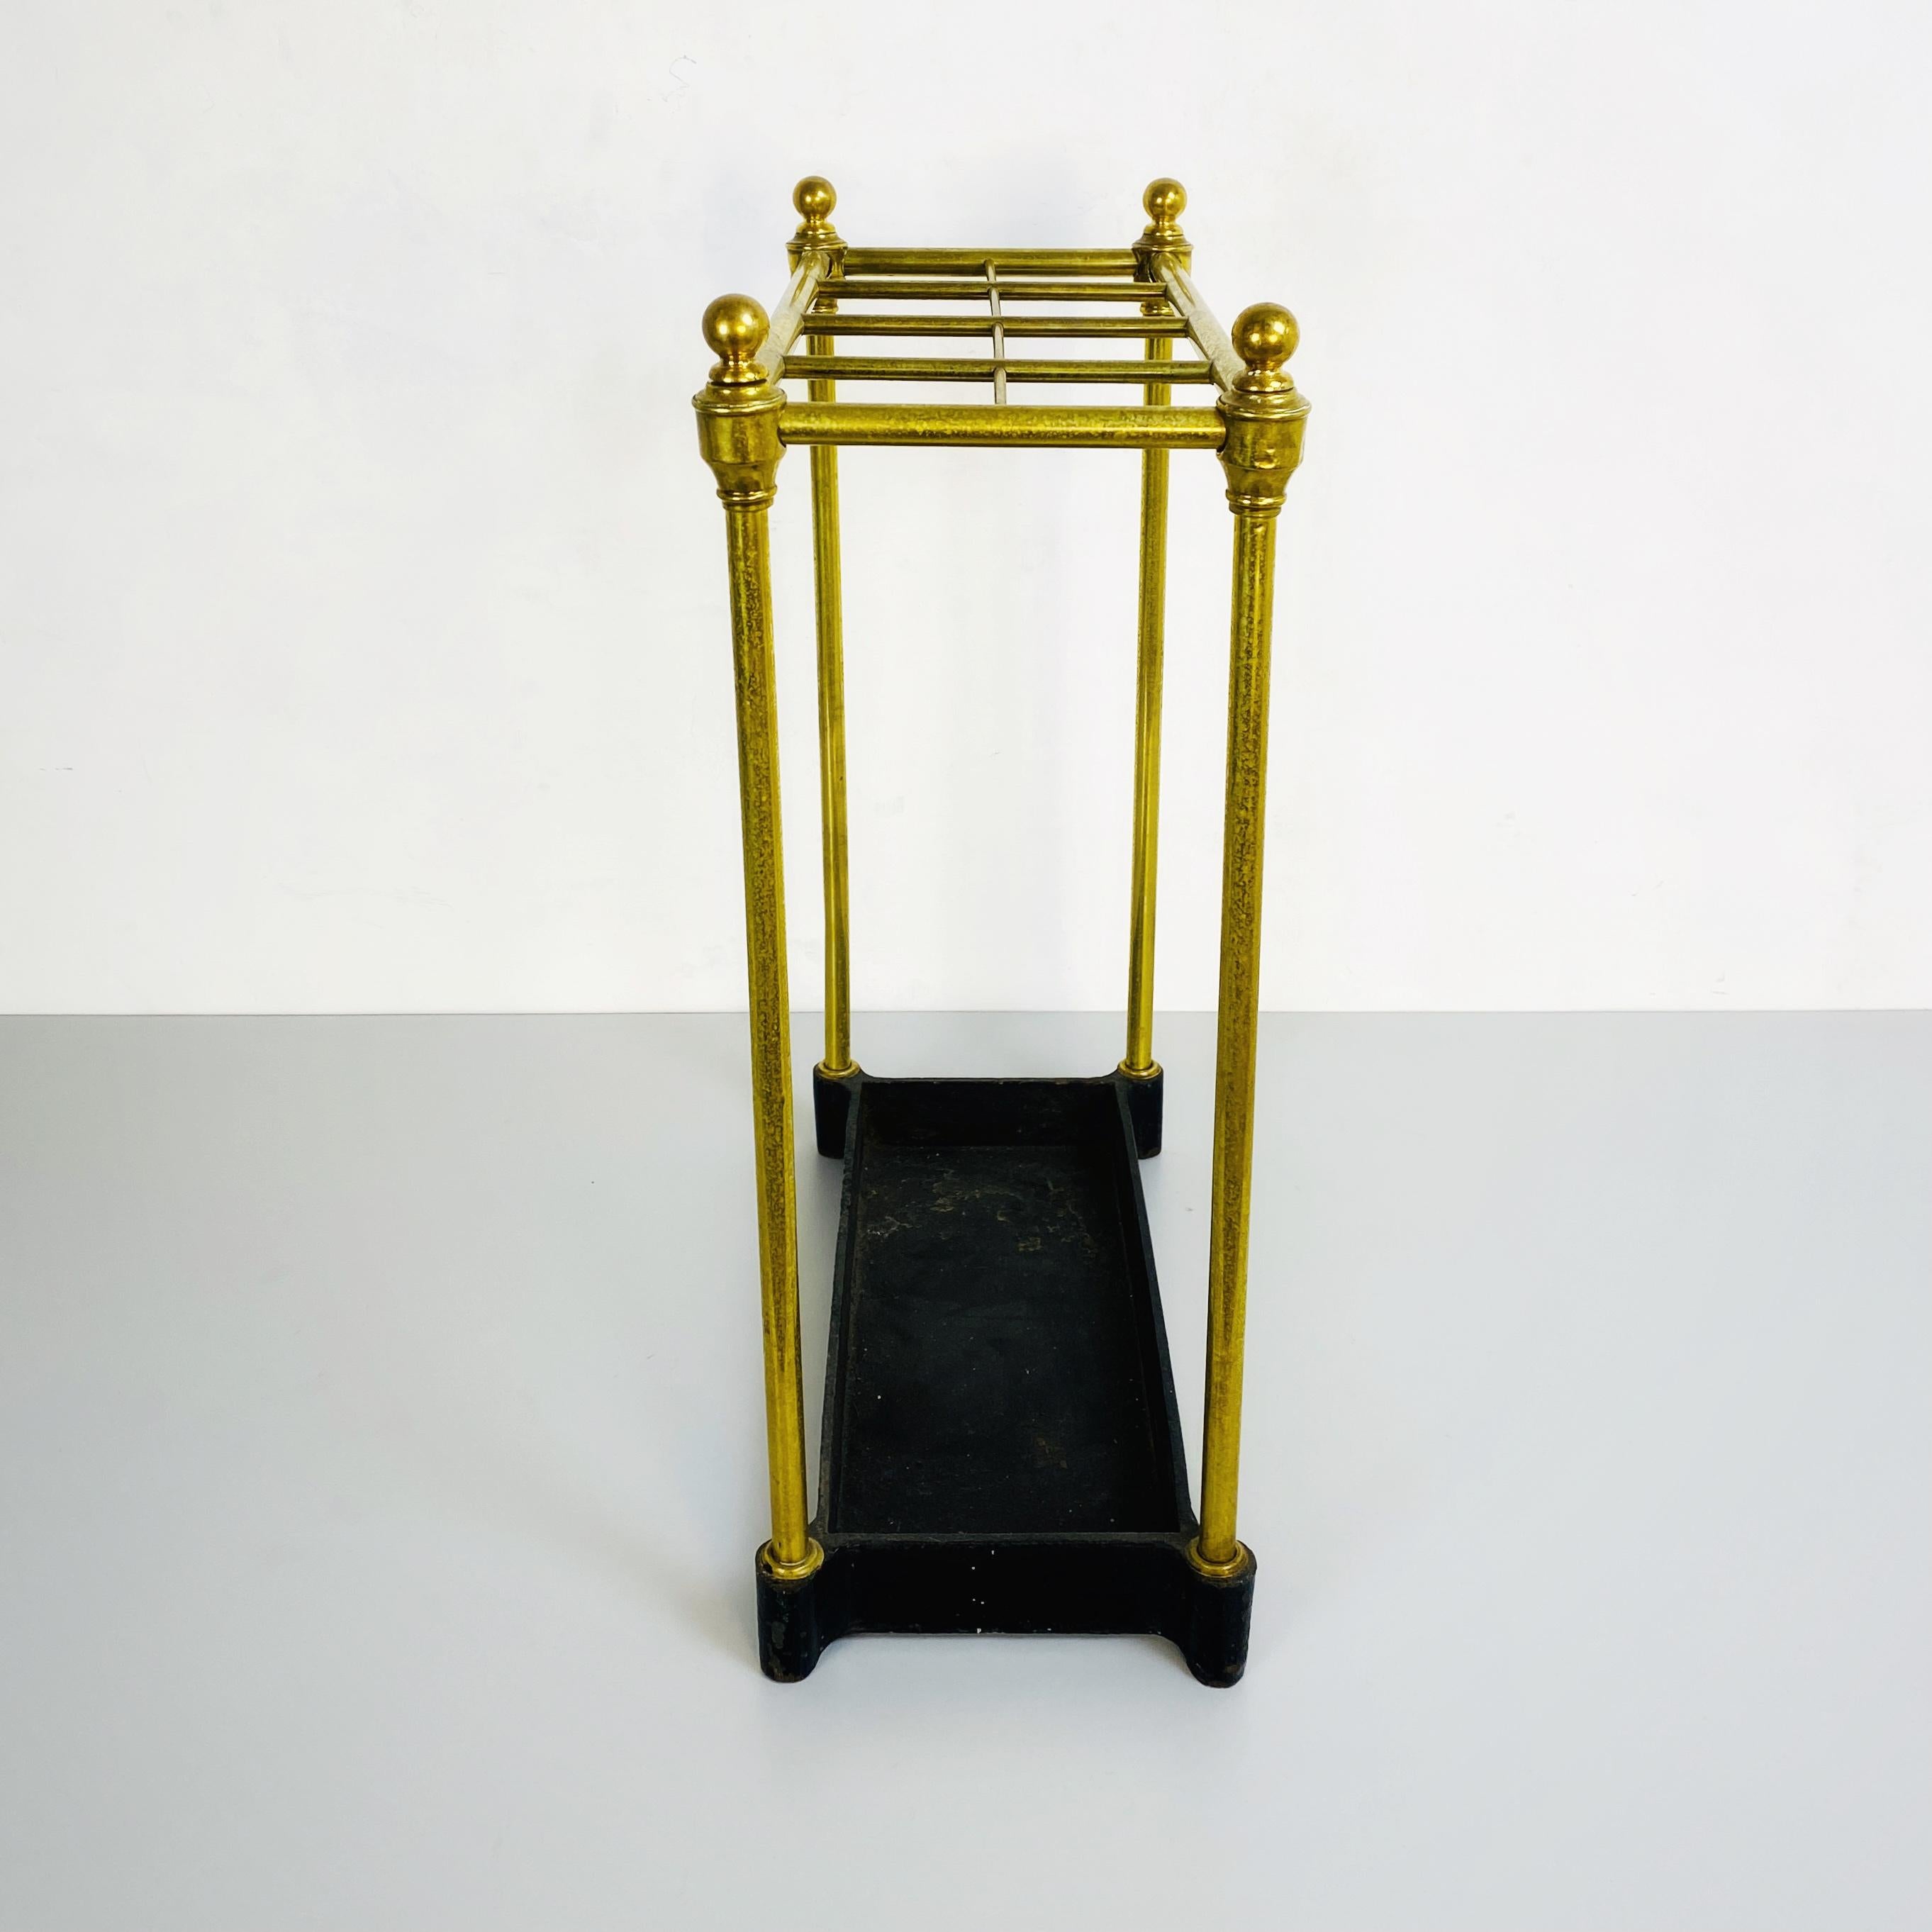 Italian Mid-Century Brass Umbrella Stand with Black Iron Base, 1950s For Sale 3